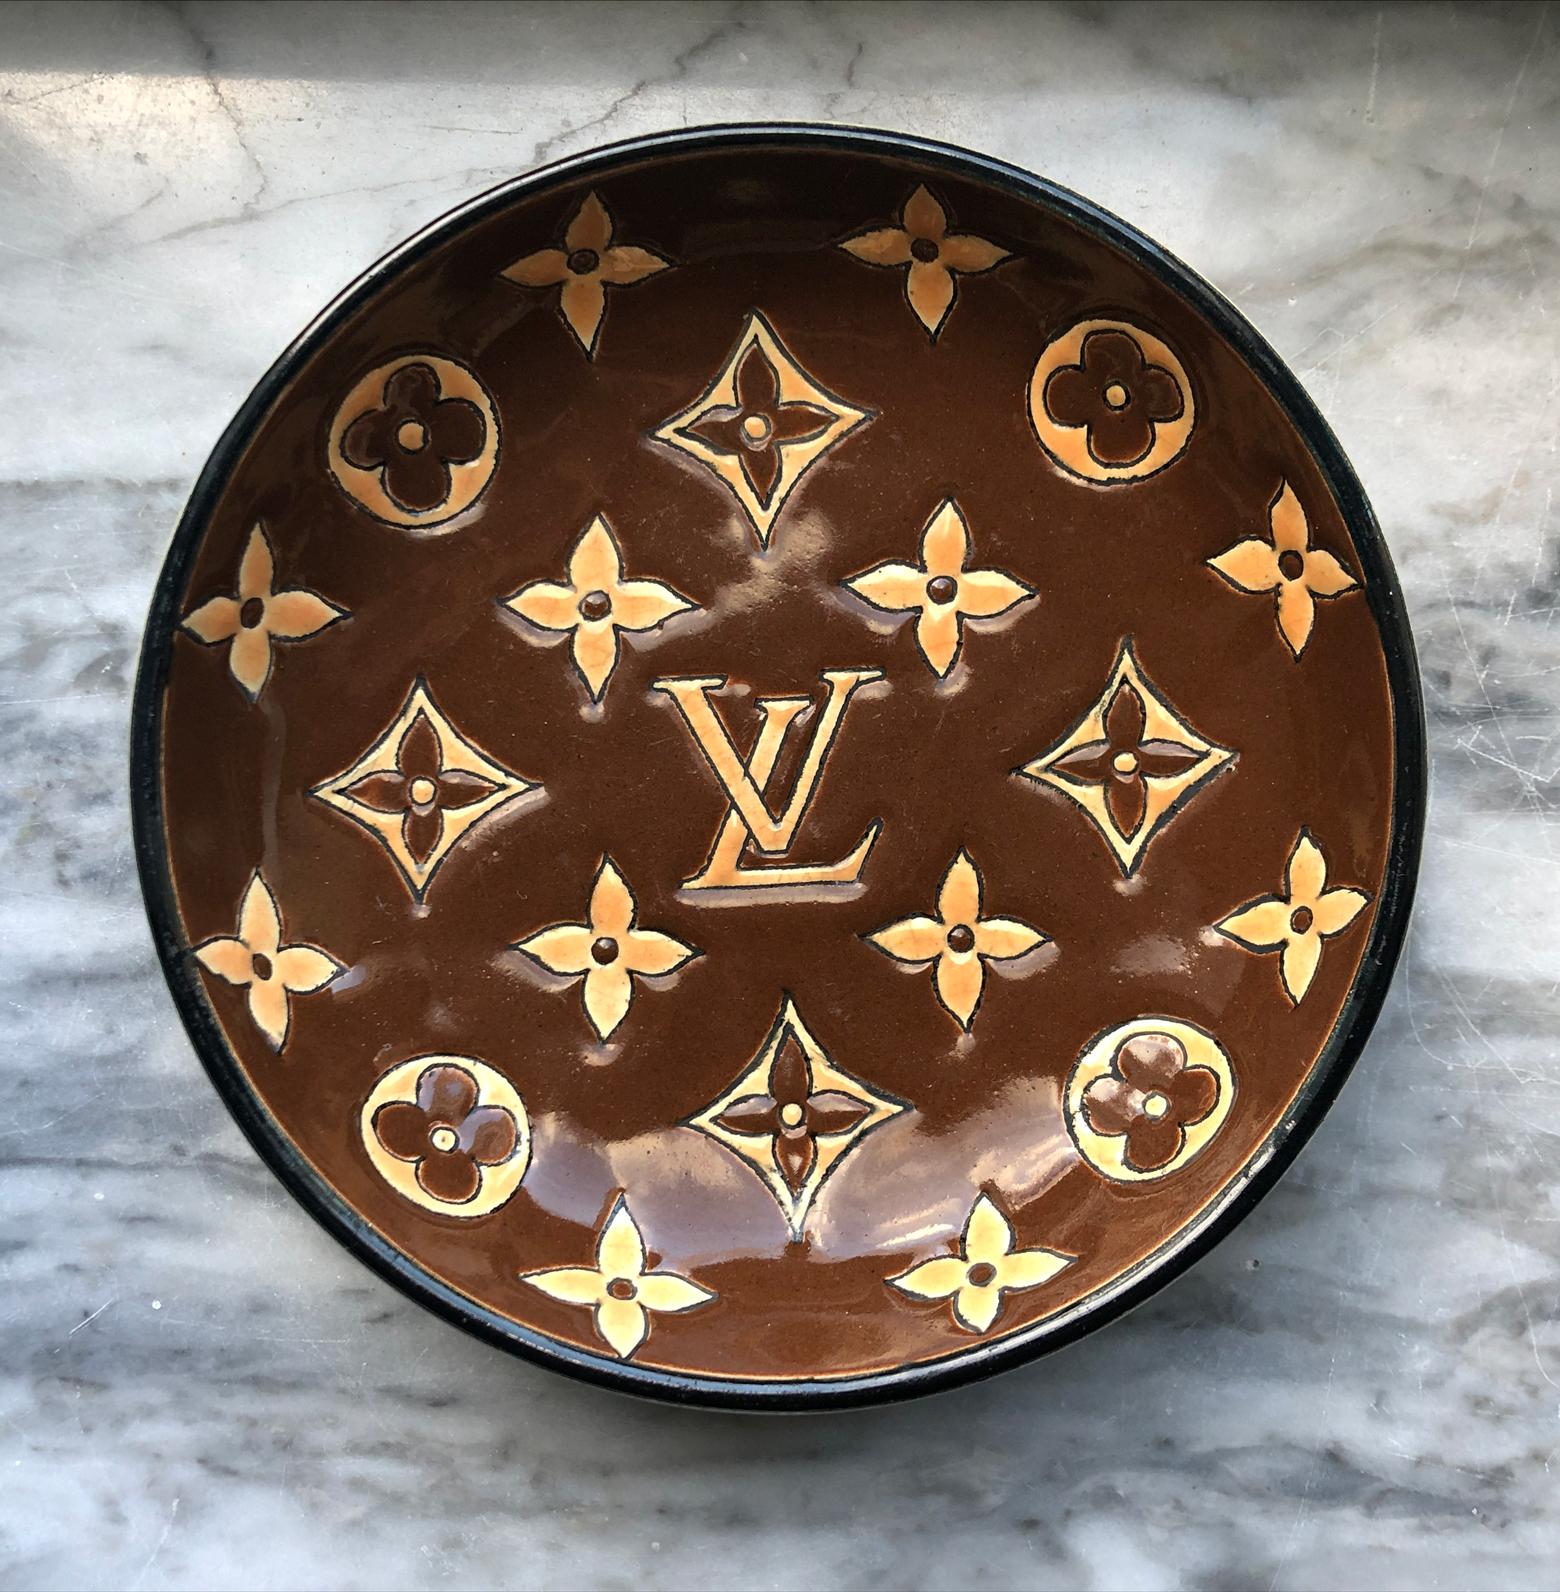 Louis Vuitton limited edition dish for Faïenceries et Emaux de Longwy, 1950s, France. A wonderful and neat porcelain glazed bowl made by Longwy painted with the iconic Louis Vuitton logo. It's one of few housewares by Louis Vuitton that came on the